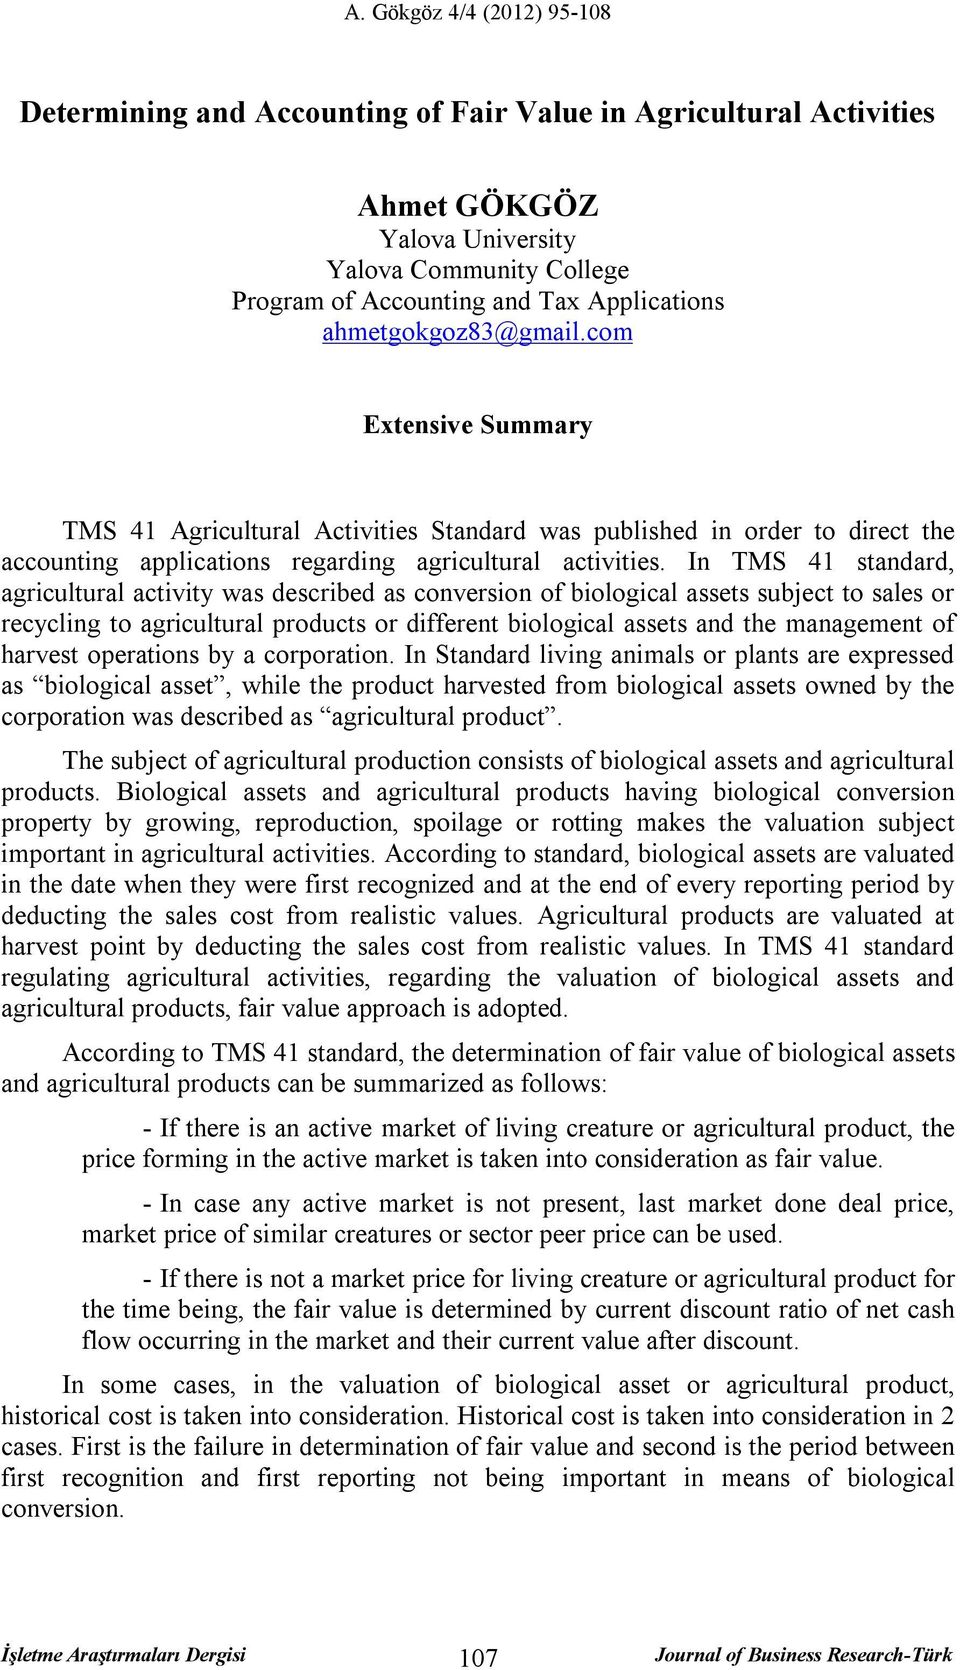 In TMS 41 standard, agricultural activity was described as conversion of biological assets subject to sales or recycling to agricultural products or different biological assets and the management of